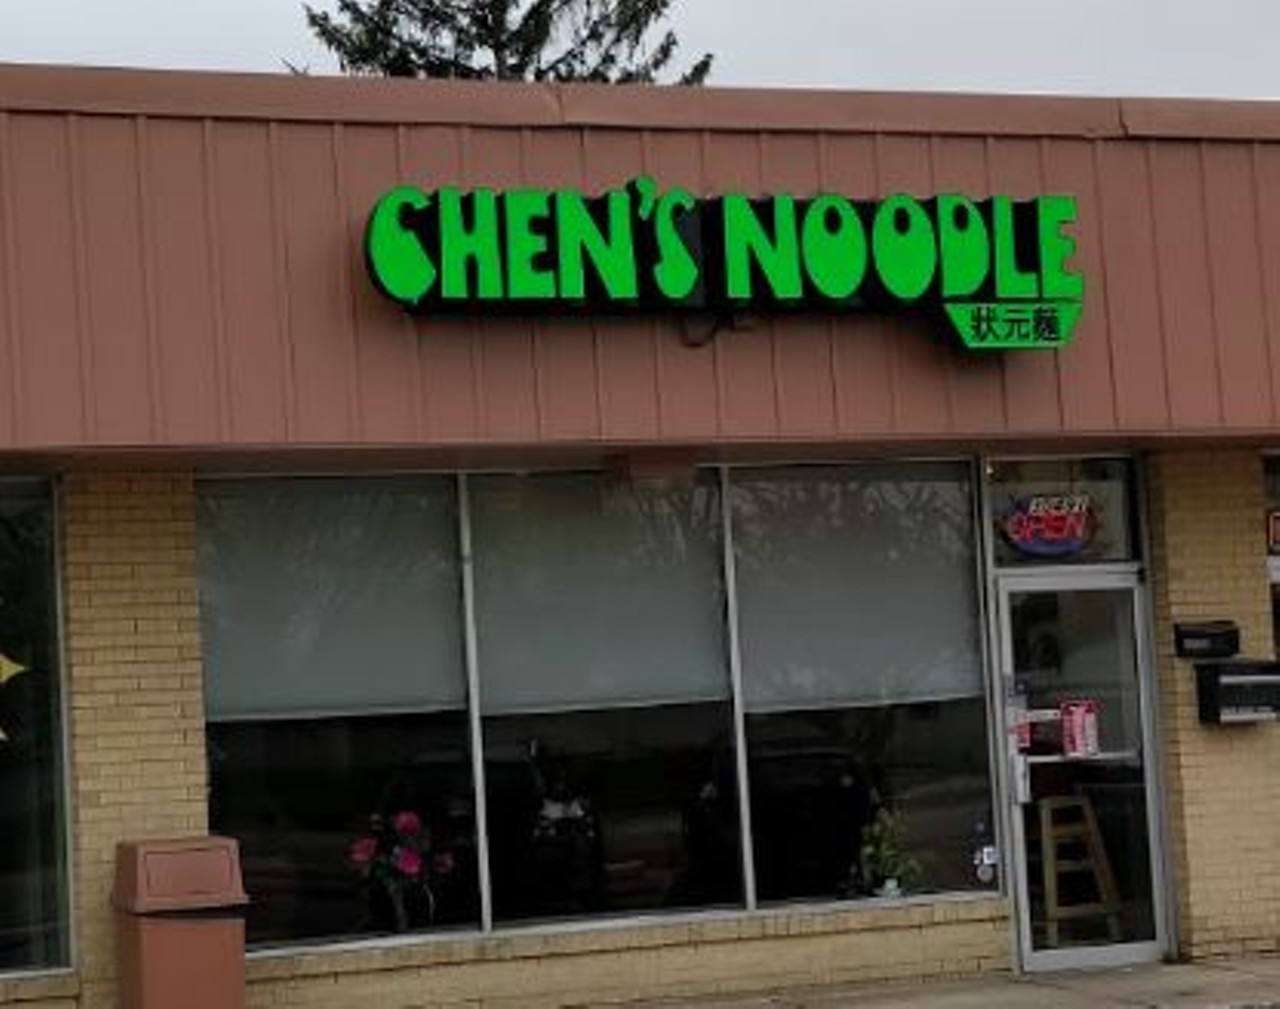 Chen&#146;s Noodle
30491 John R Rd., Madison Heights; 248-588-7823
Serving unique dishes, Chen&#146;s Noodle specializes in wontons, tofu, duck, buns, rolls, and more. Its noodles and noodle soups are customers&#146; favorites.
Photo via GoogleMaps